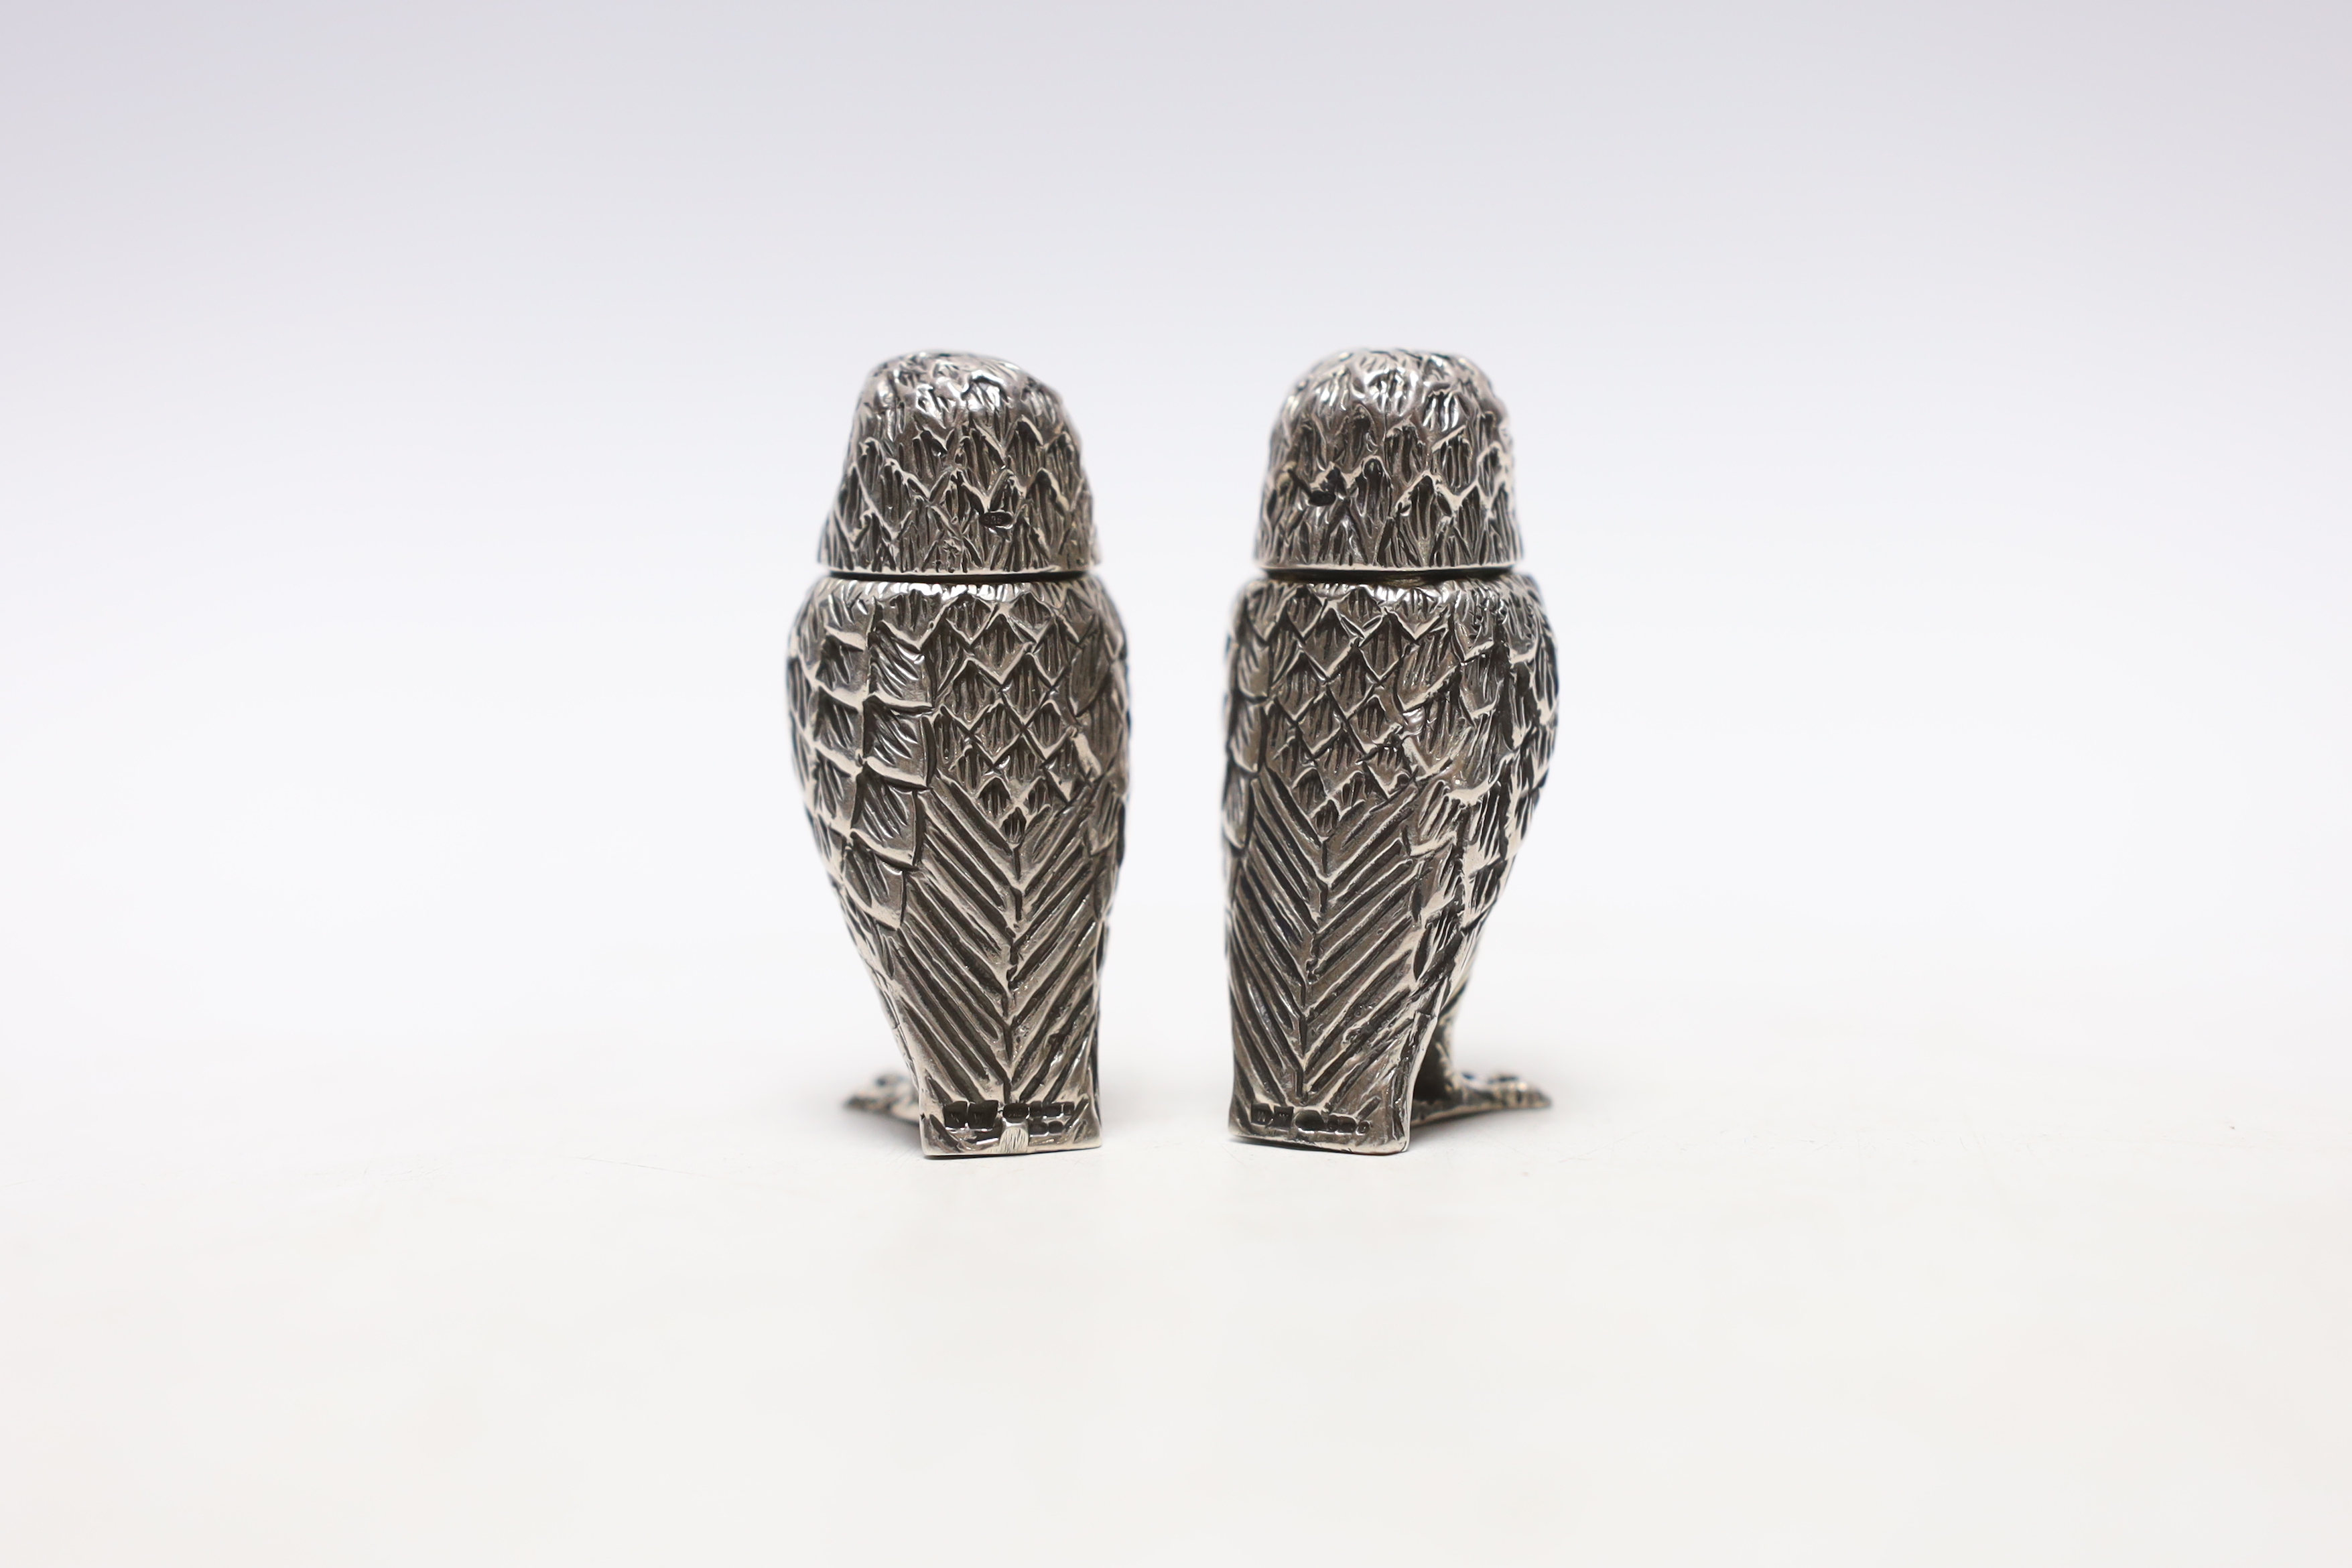 A pair of Elizabeth II novelty silver condiments, each modelled as an owl, maker WW, London, 2008, - Image 3 of 4